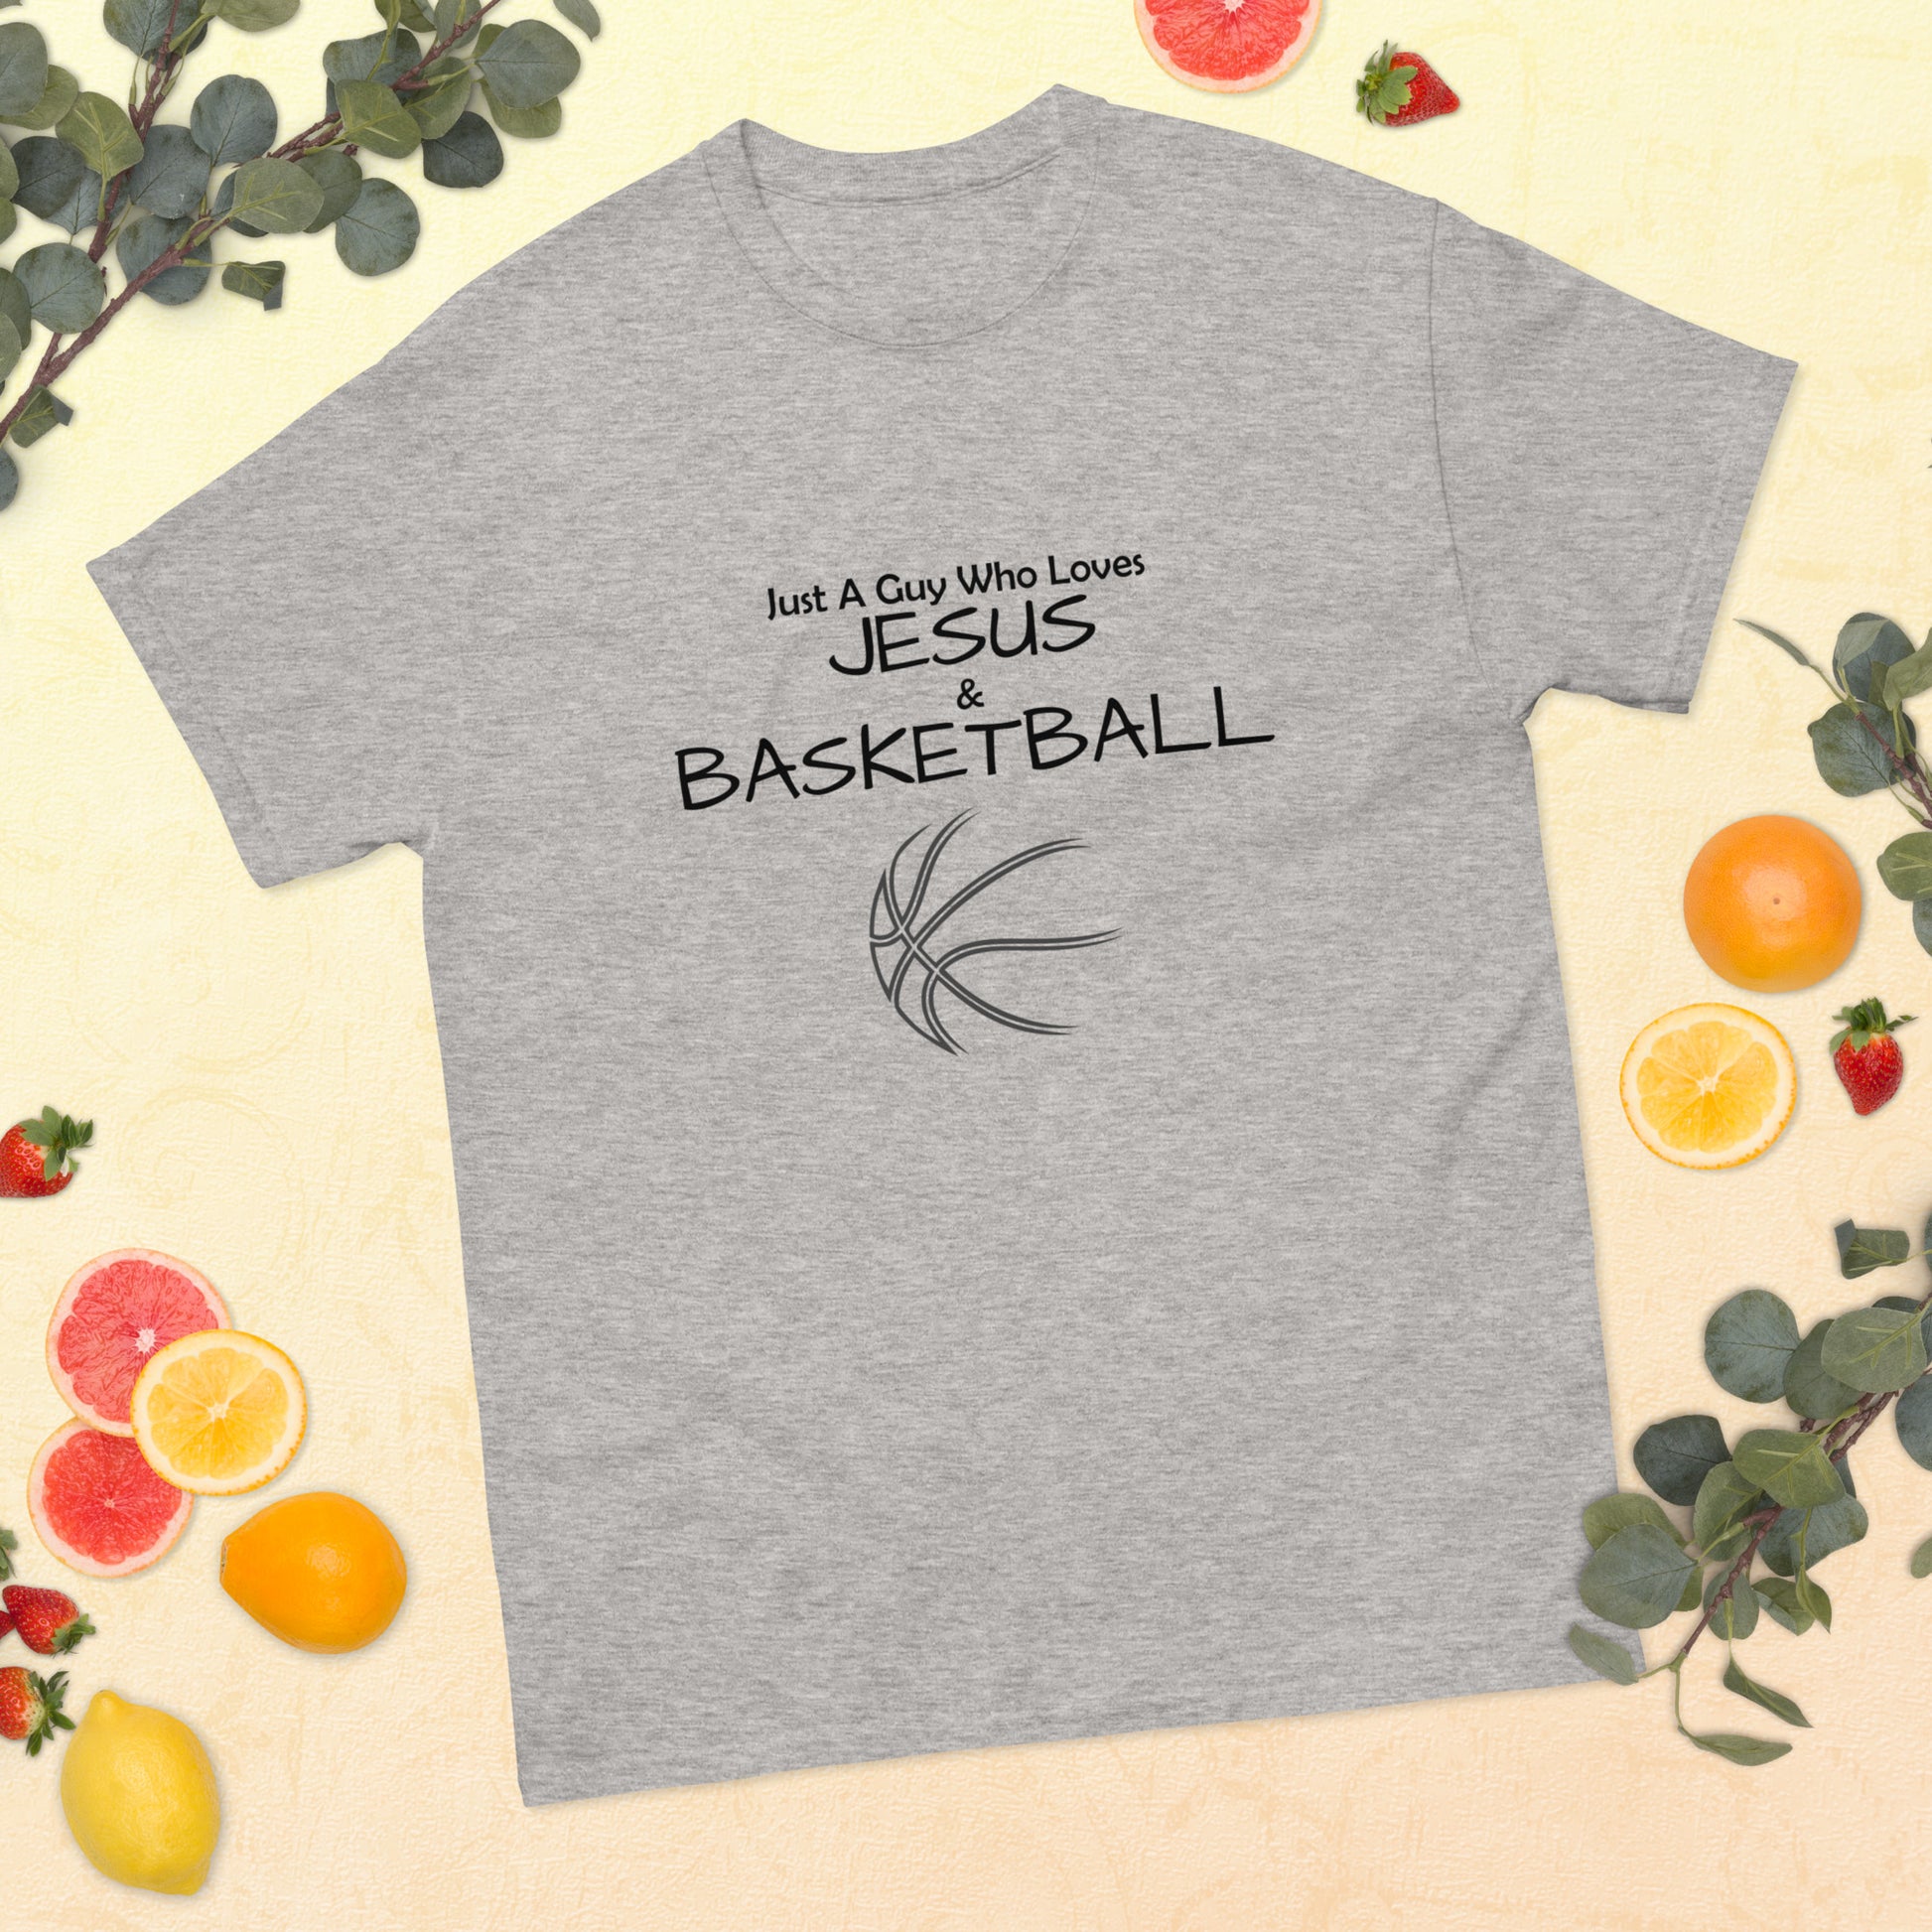 "Just A Guy Who Loves Jesus & Basketball" T-Shirt - Weave Got Gifts - Unique Gifts You Won’t Find Anywhere Else!